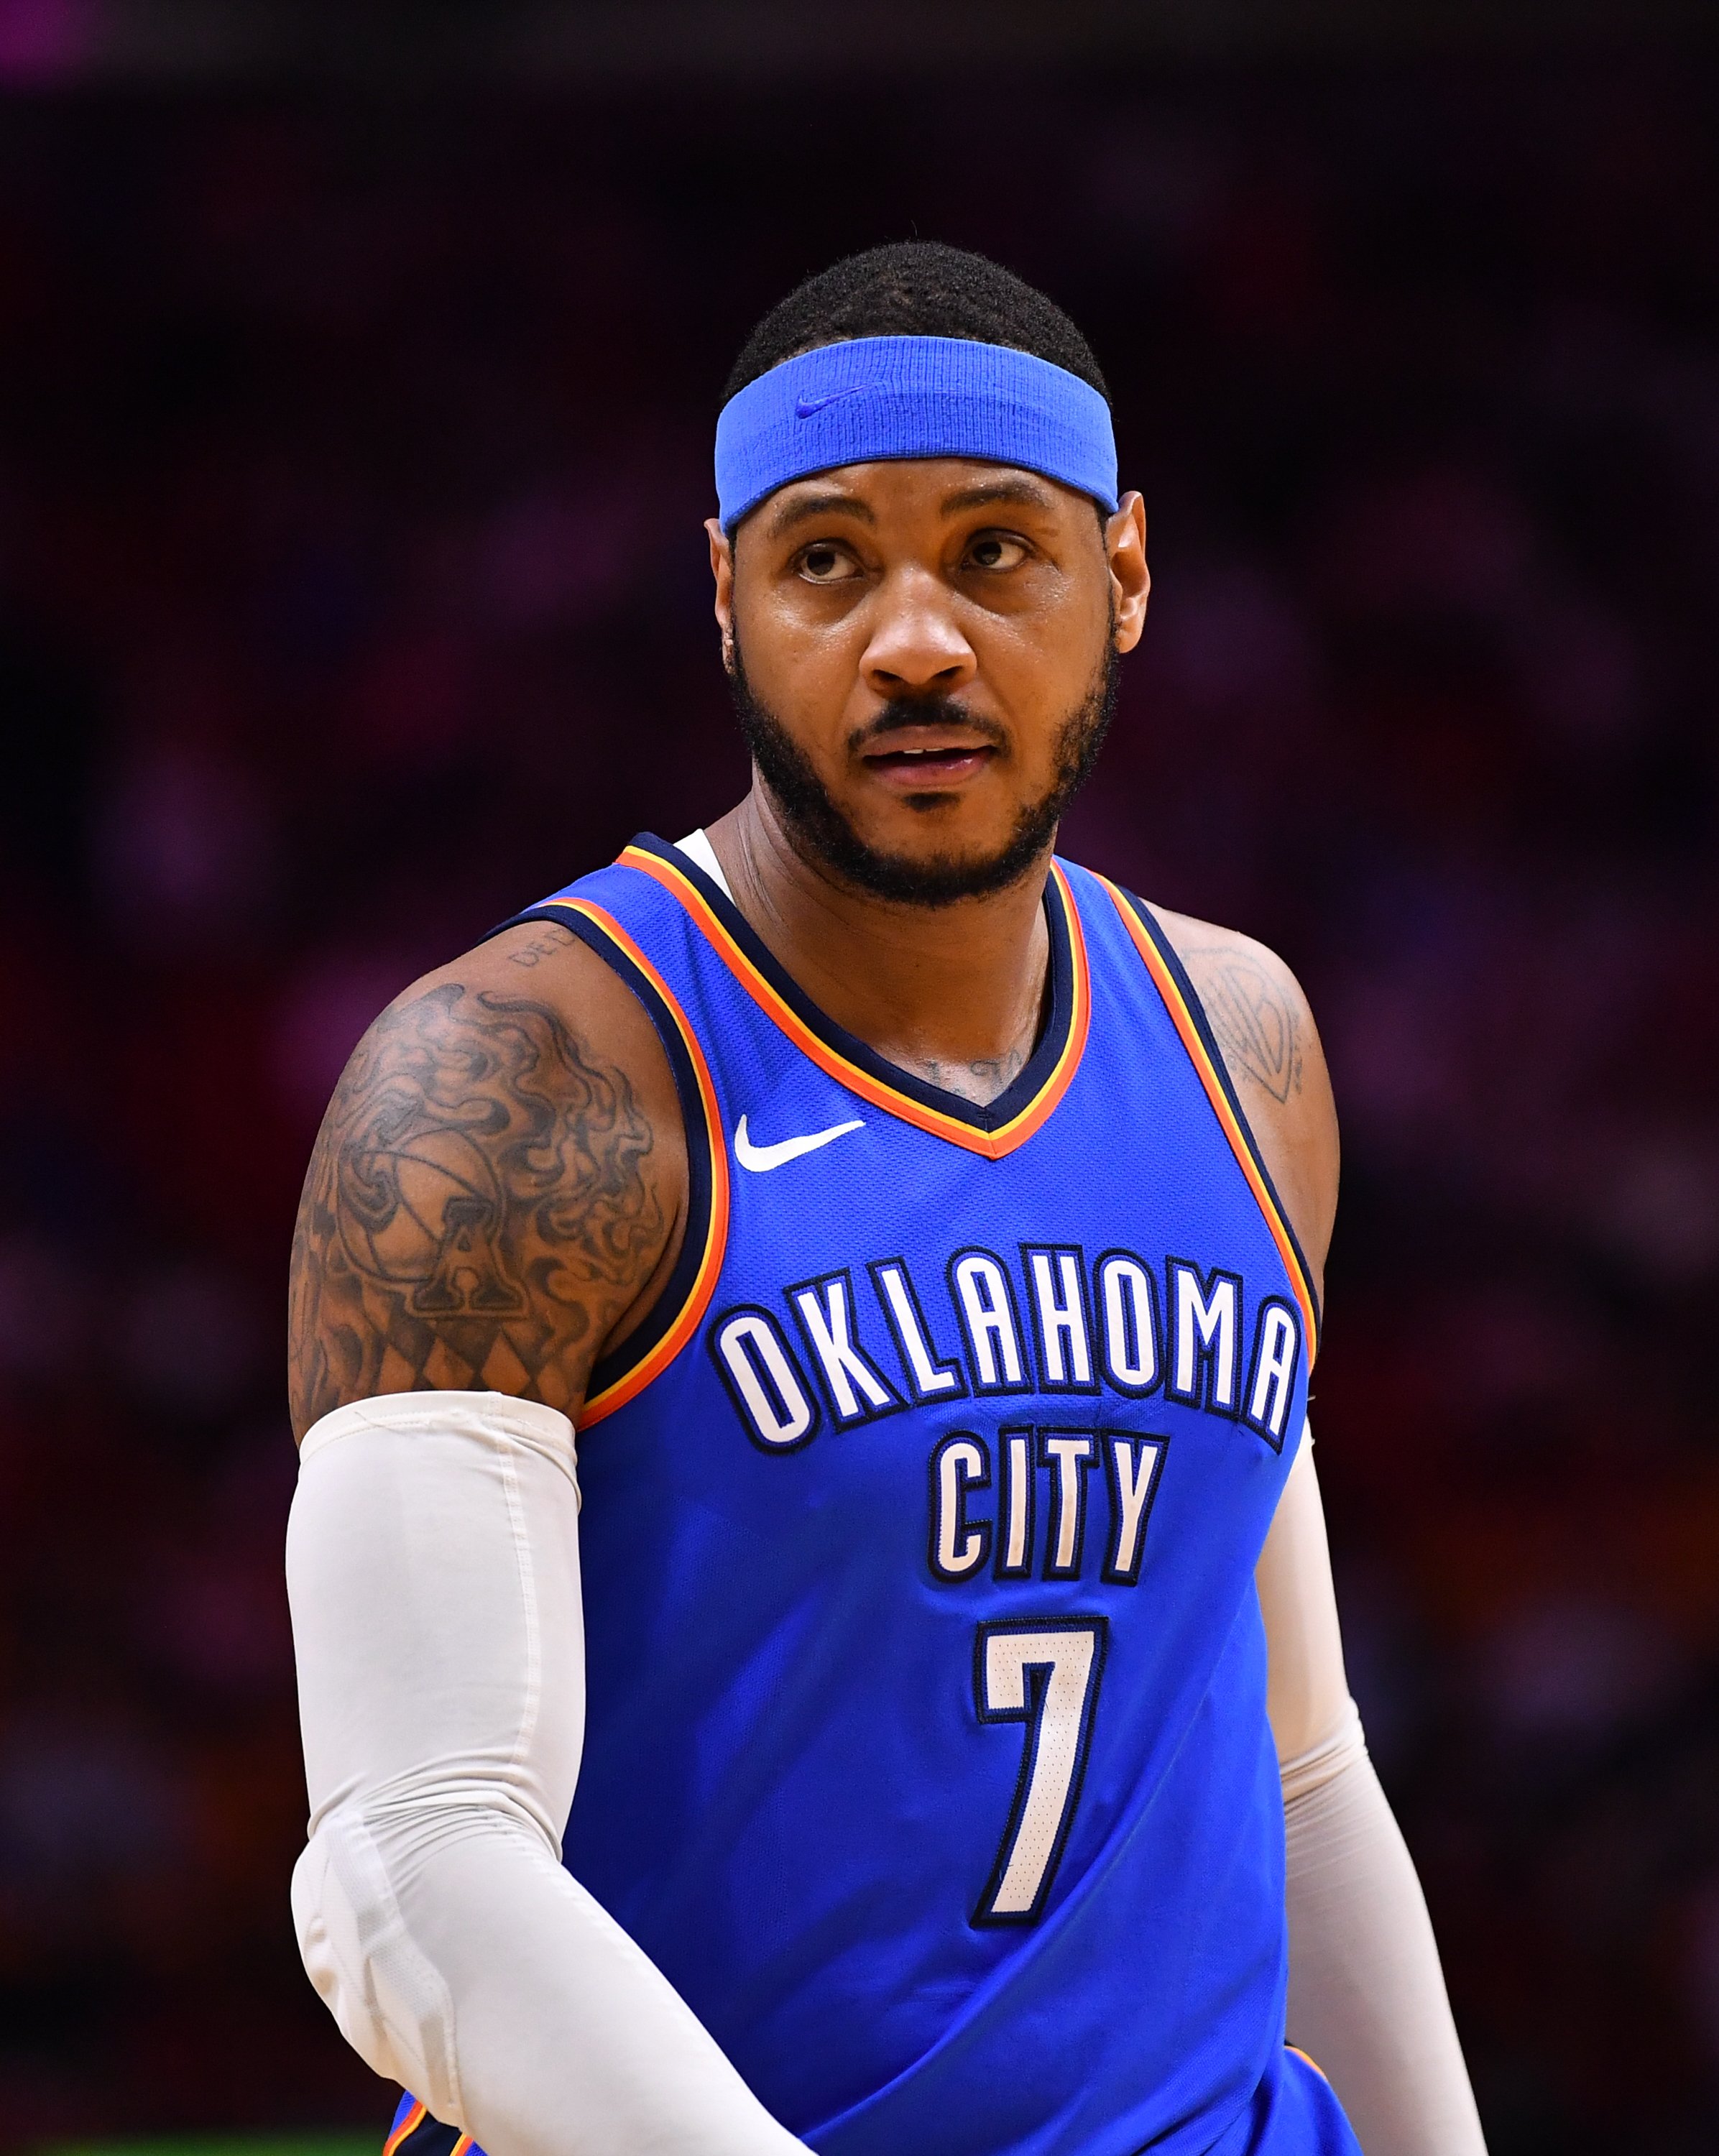 Lakers legend Carmelo Anthony's parents: Mary Anthony raised him alone without his father